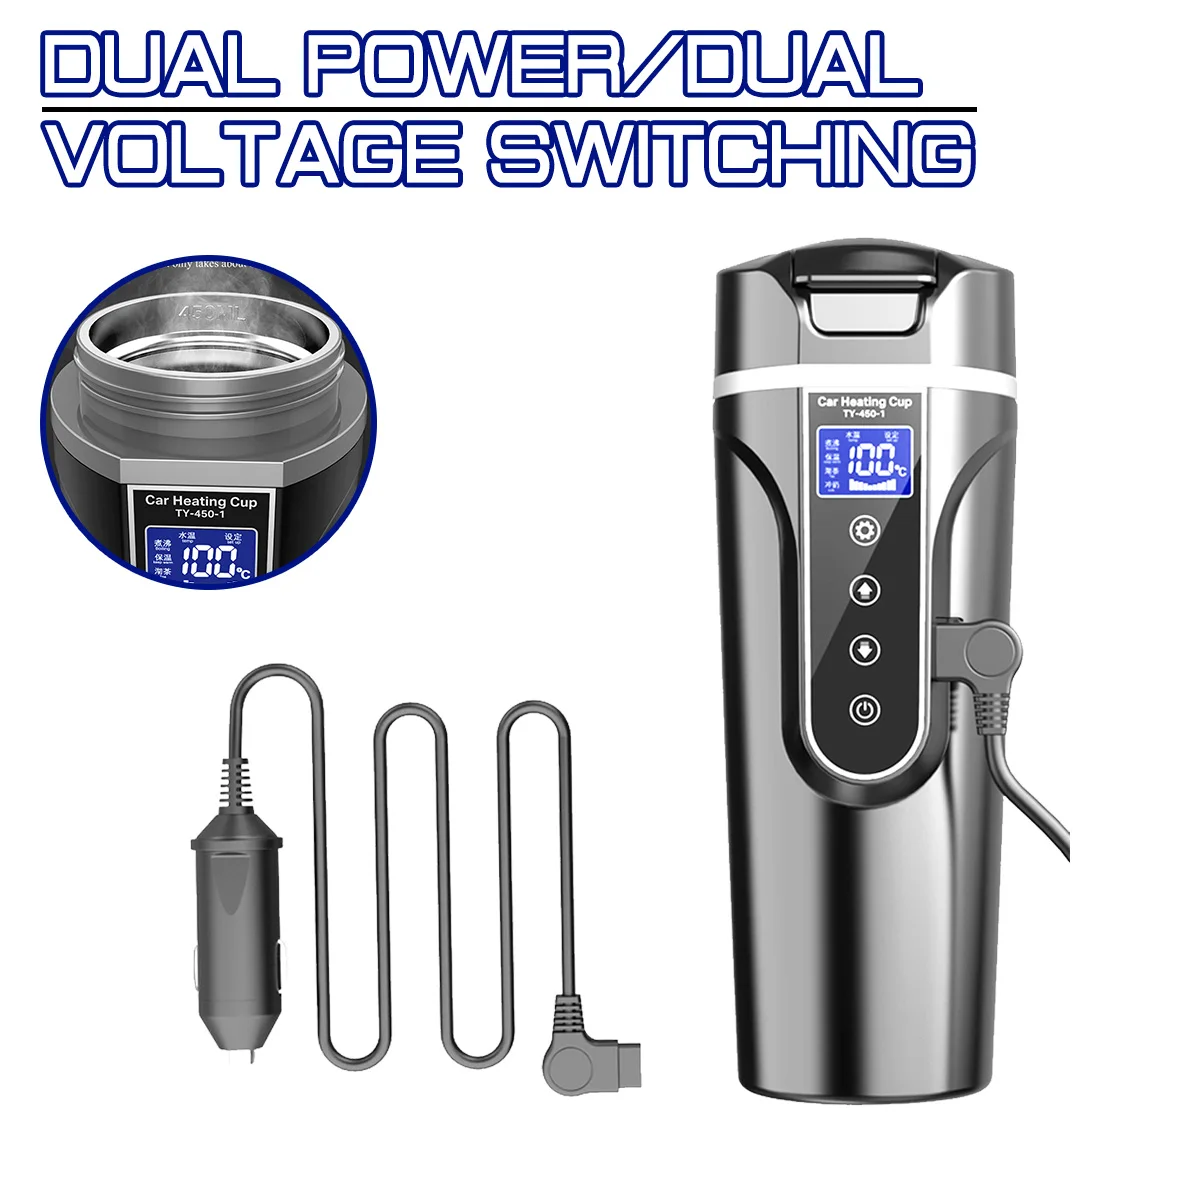 

450ml DC 12V/24V Stainless Steel Car Heating Cup Electric Water Cup LCD Display Temperature Kettle Coffee Tea Milk Heated